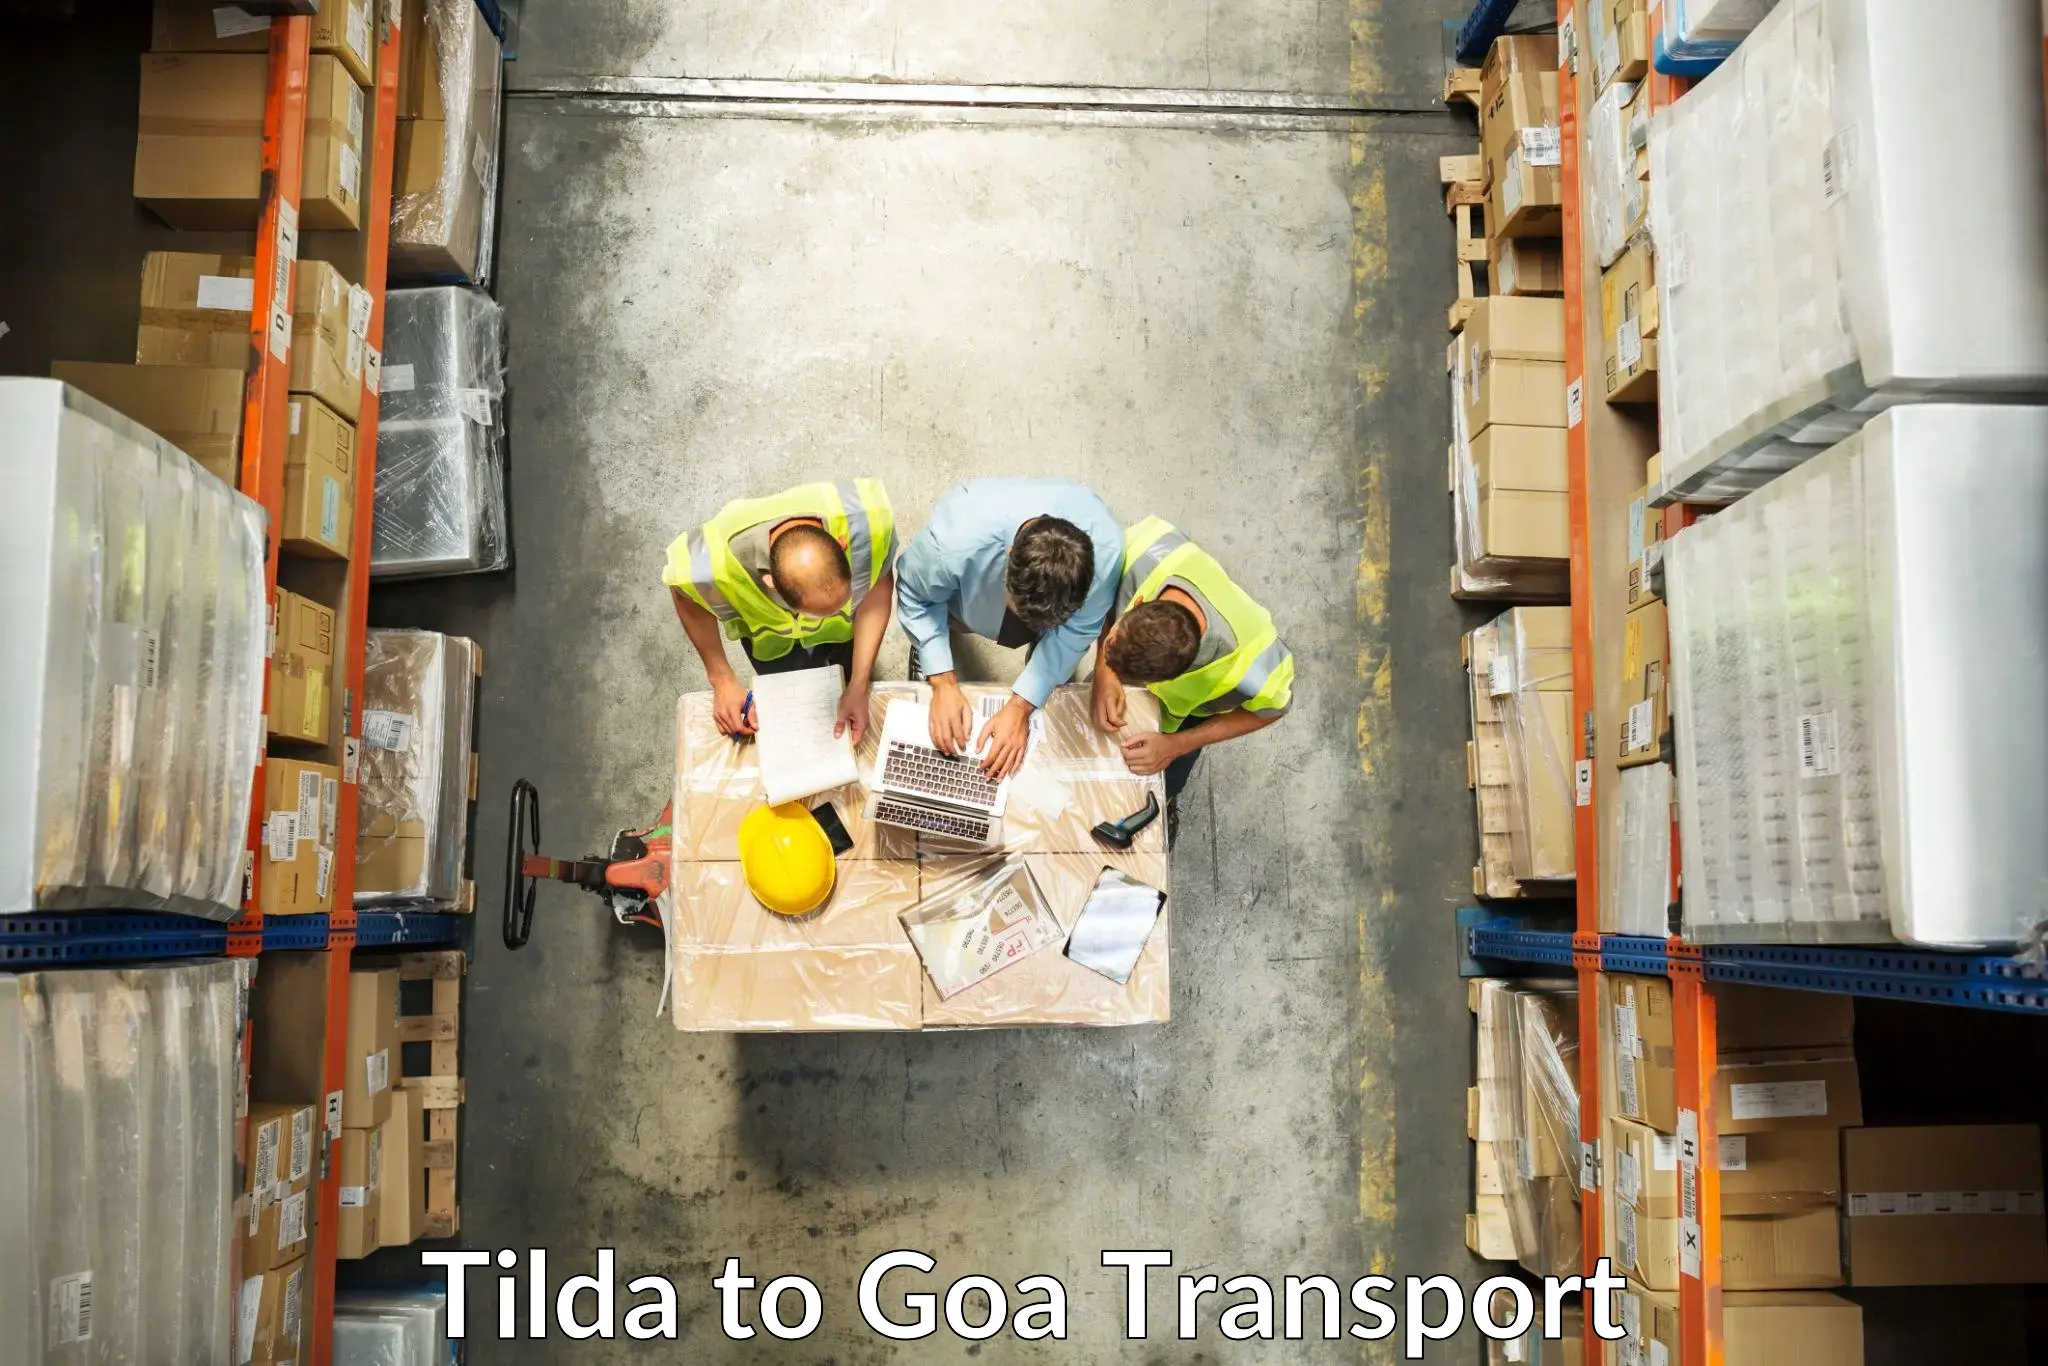 Transport bike from one state to another Tilda to Goa University